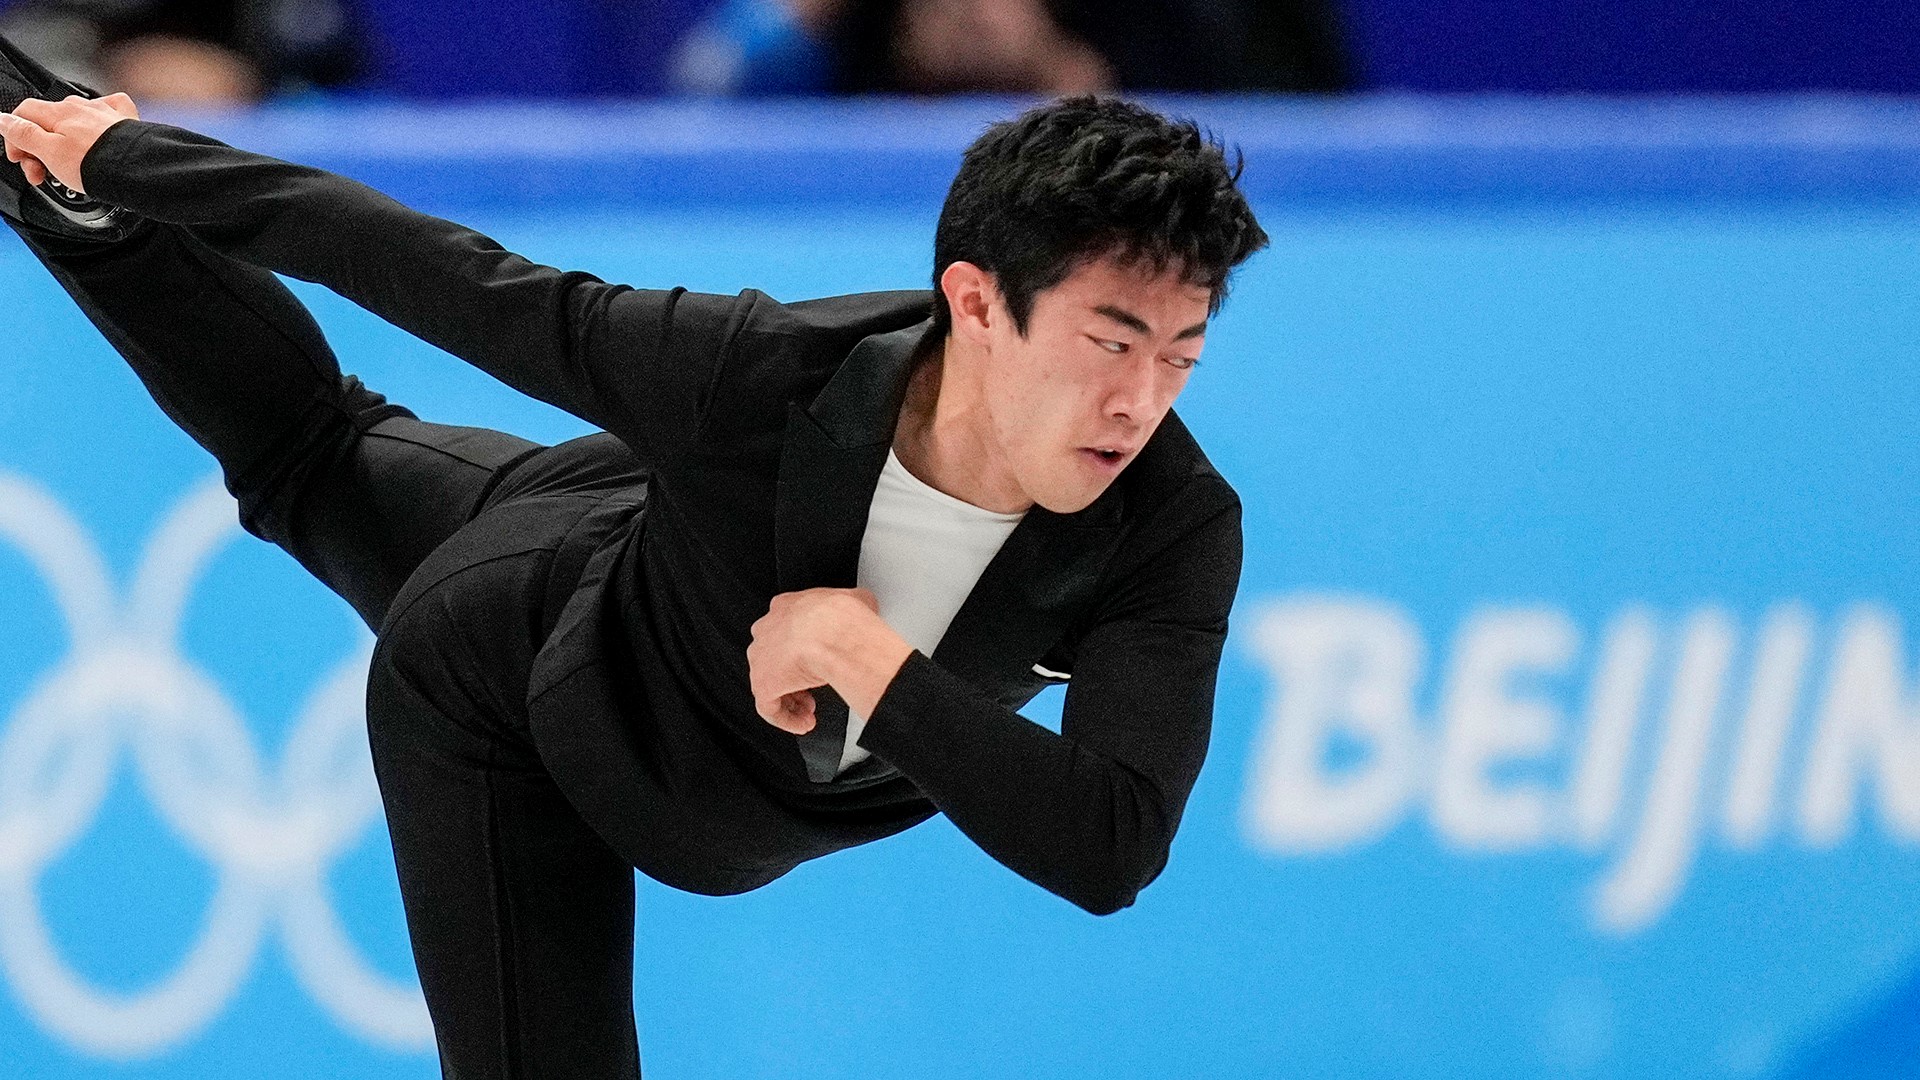 Nathan Chen returns to the ice as one of the favorites in men's figure skating. And the U.S. and Canada meet in a possible women's hockey gold medal preview.